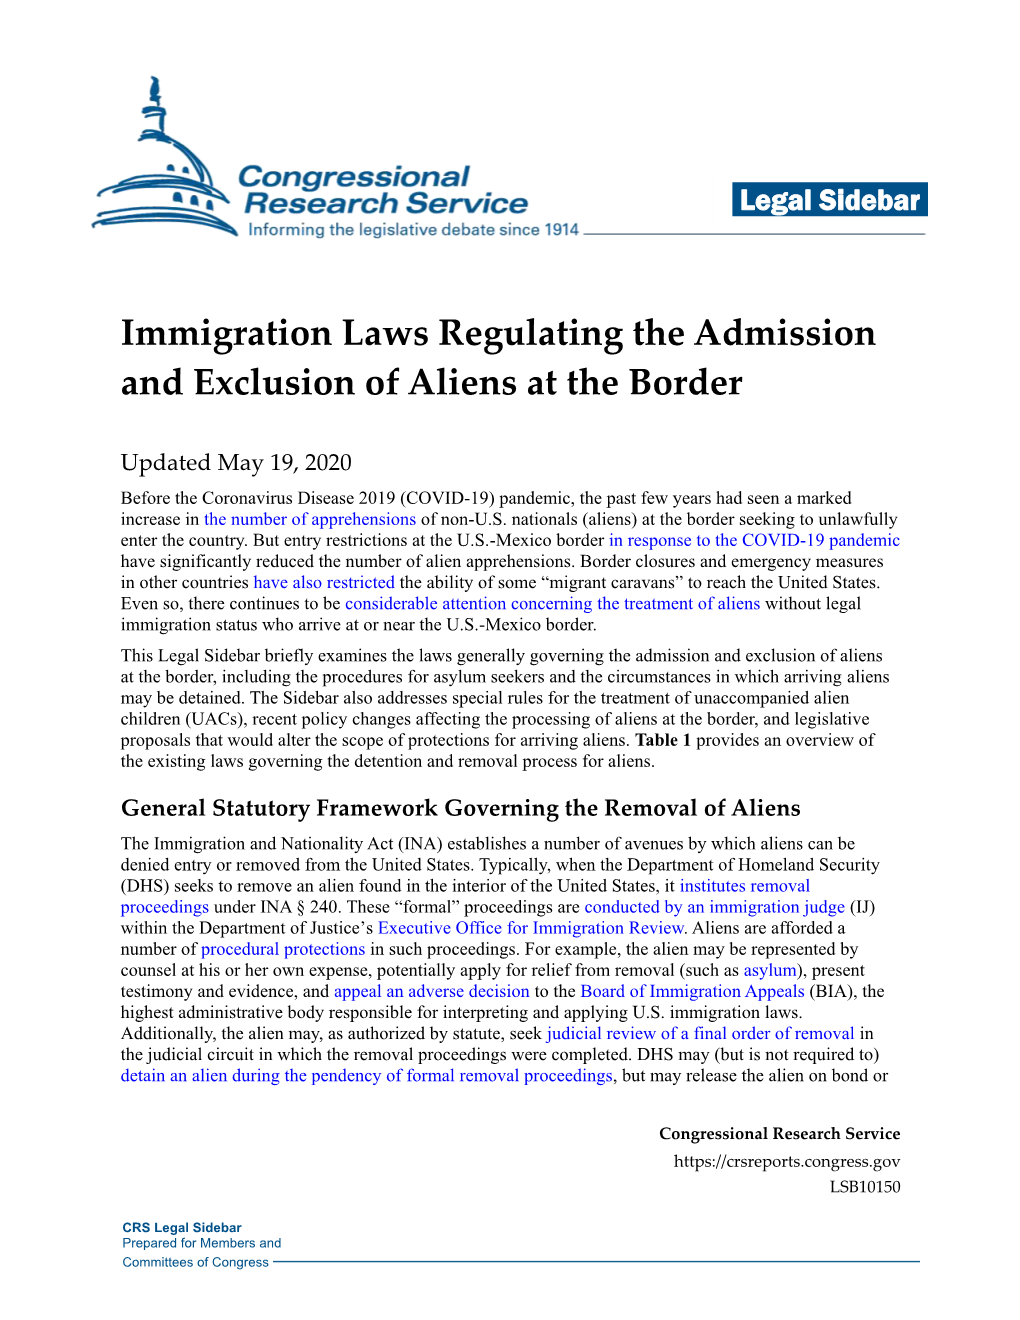 Immigration Laws Regulating the Admission and Exclusion of Aliens at the Border